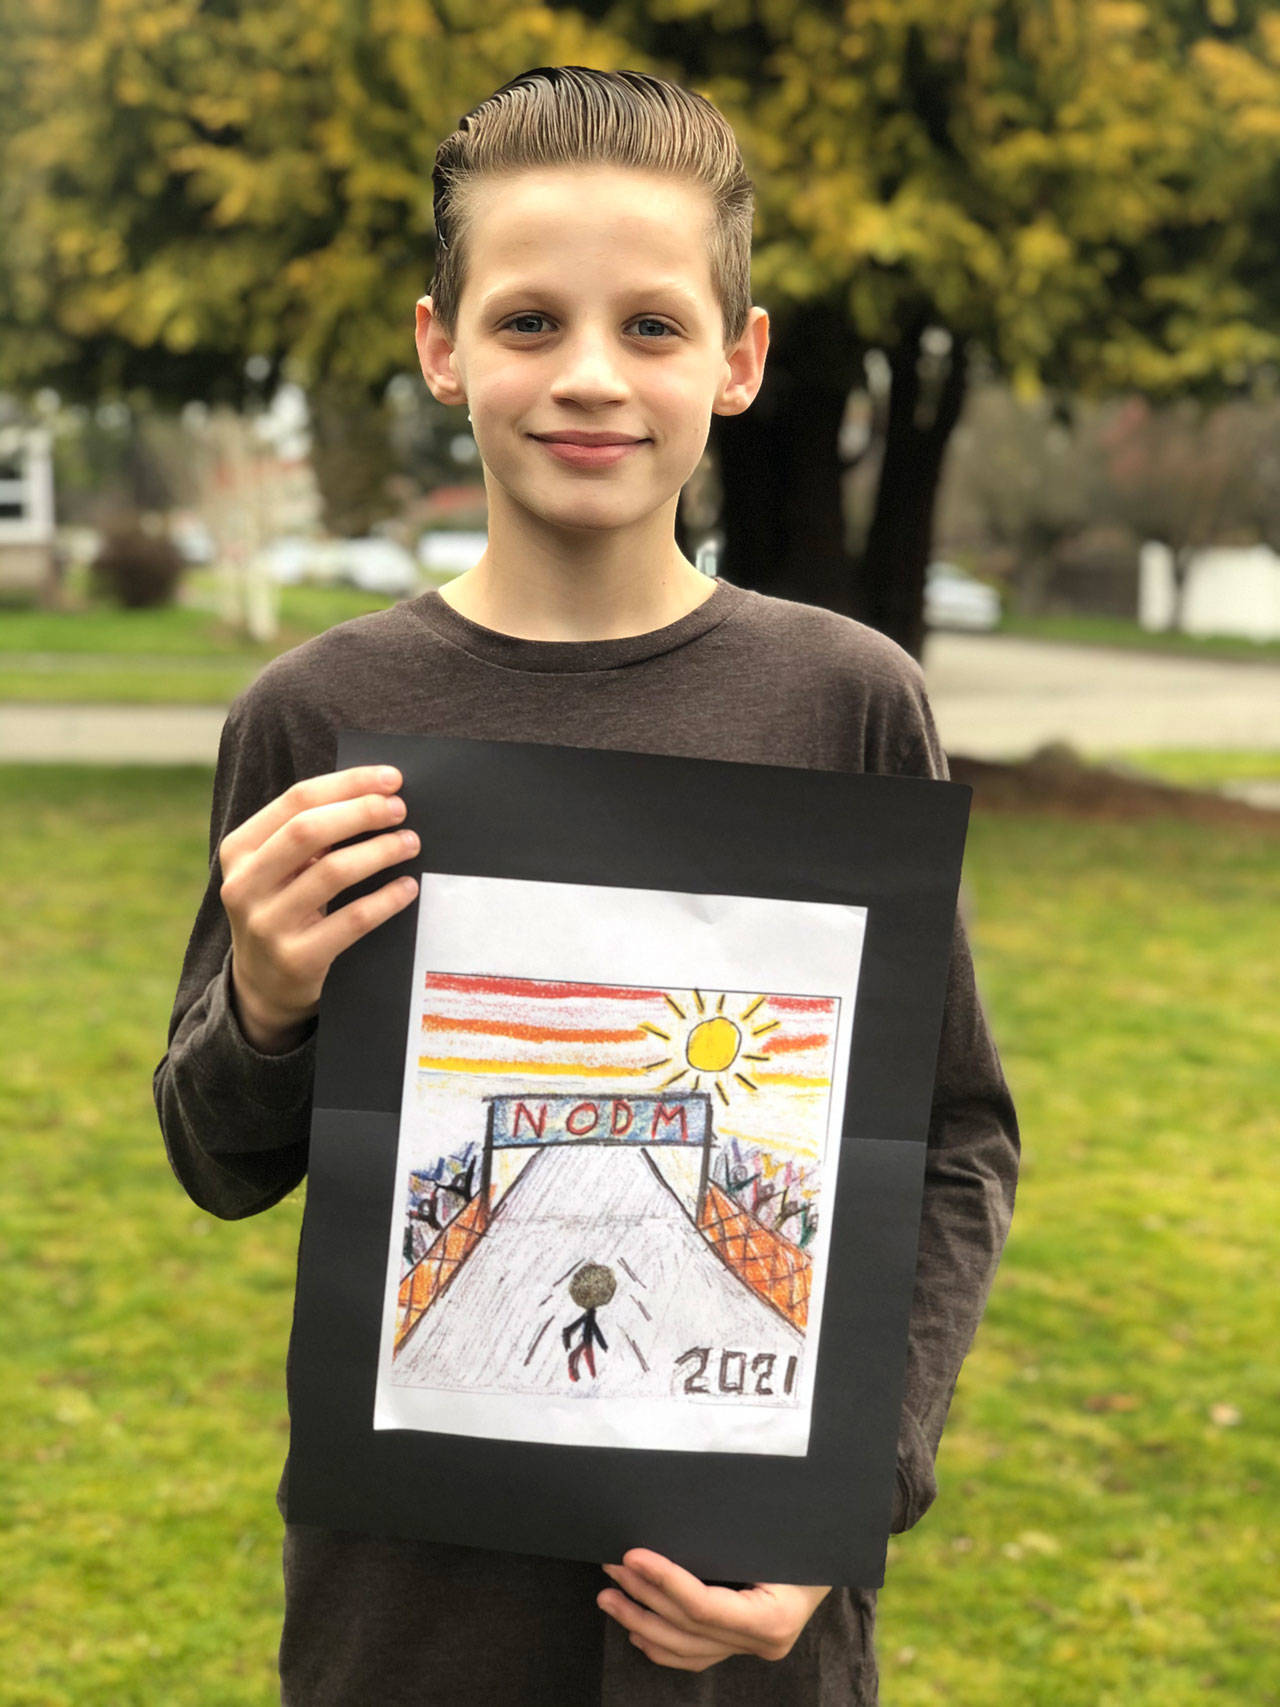 John Ruddell, a 12-year-old student at Dry Creek Elementary in Port Angeles, shows off his award-winning entry in the 2021 North Olympic Discovery Kids Marathon Medal Design Contest. Submitted photo